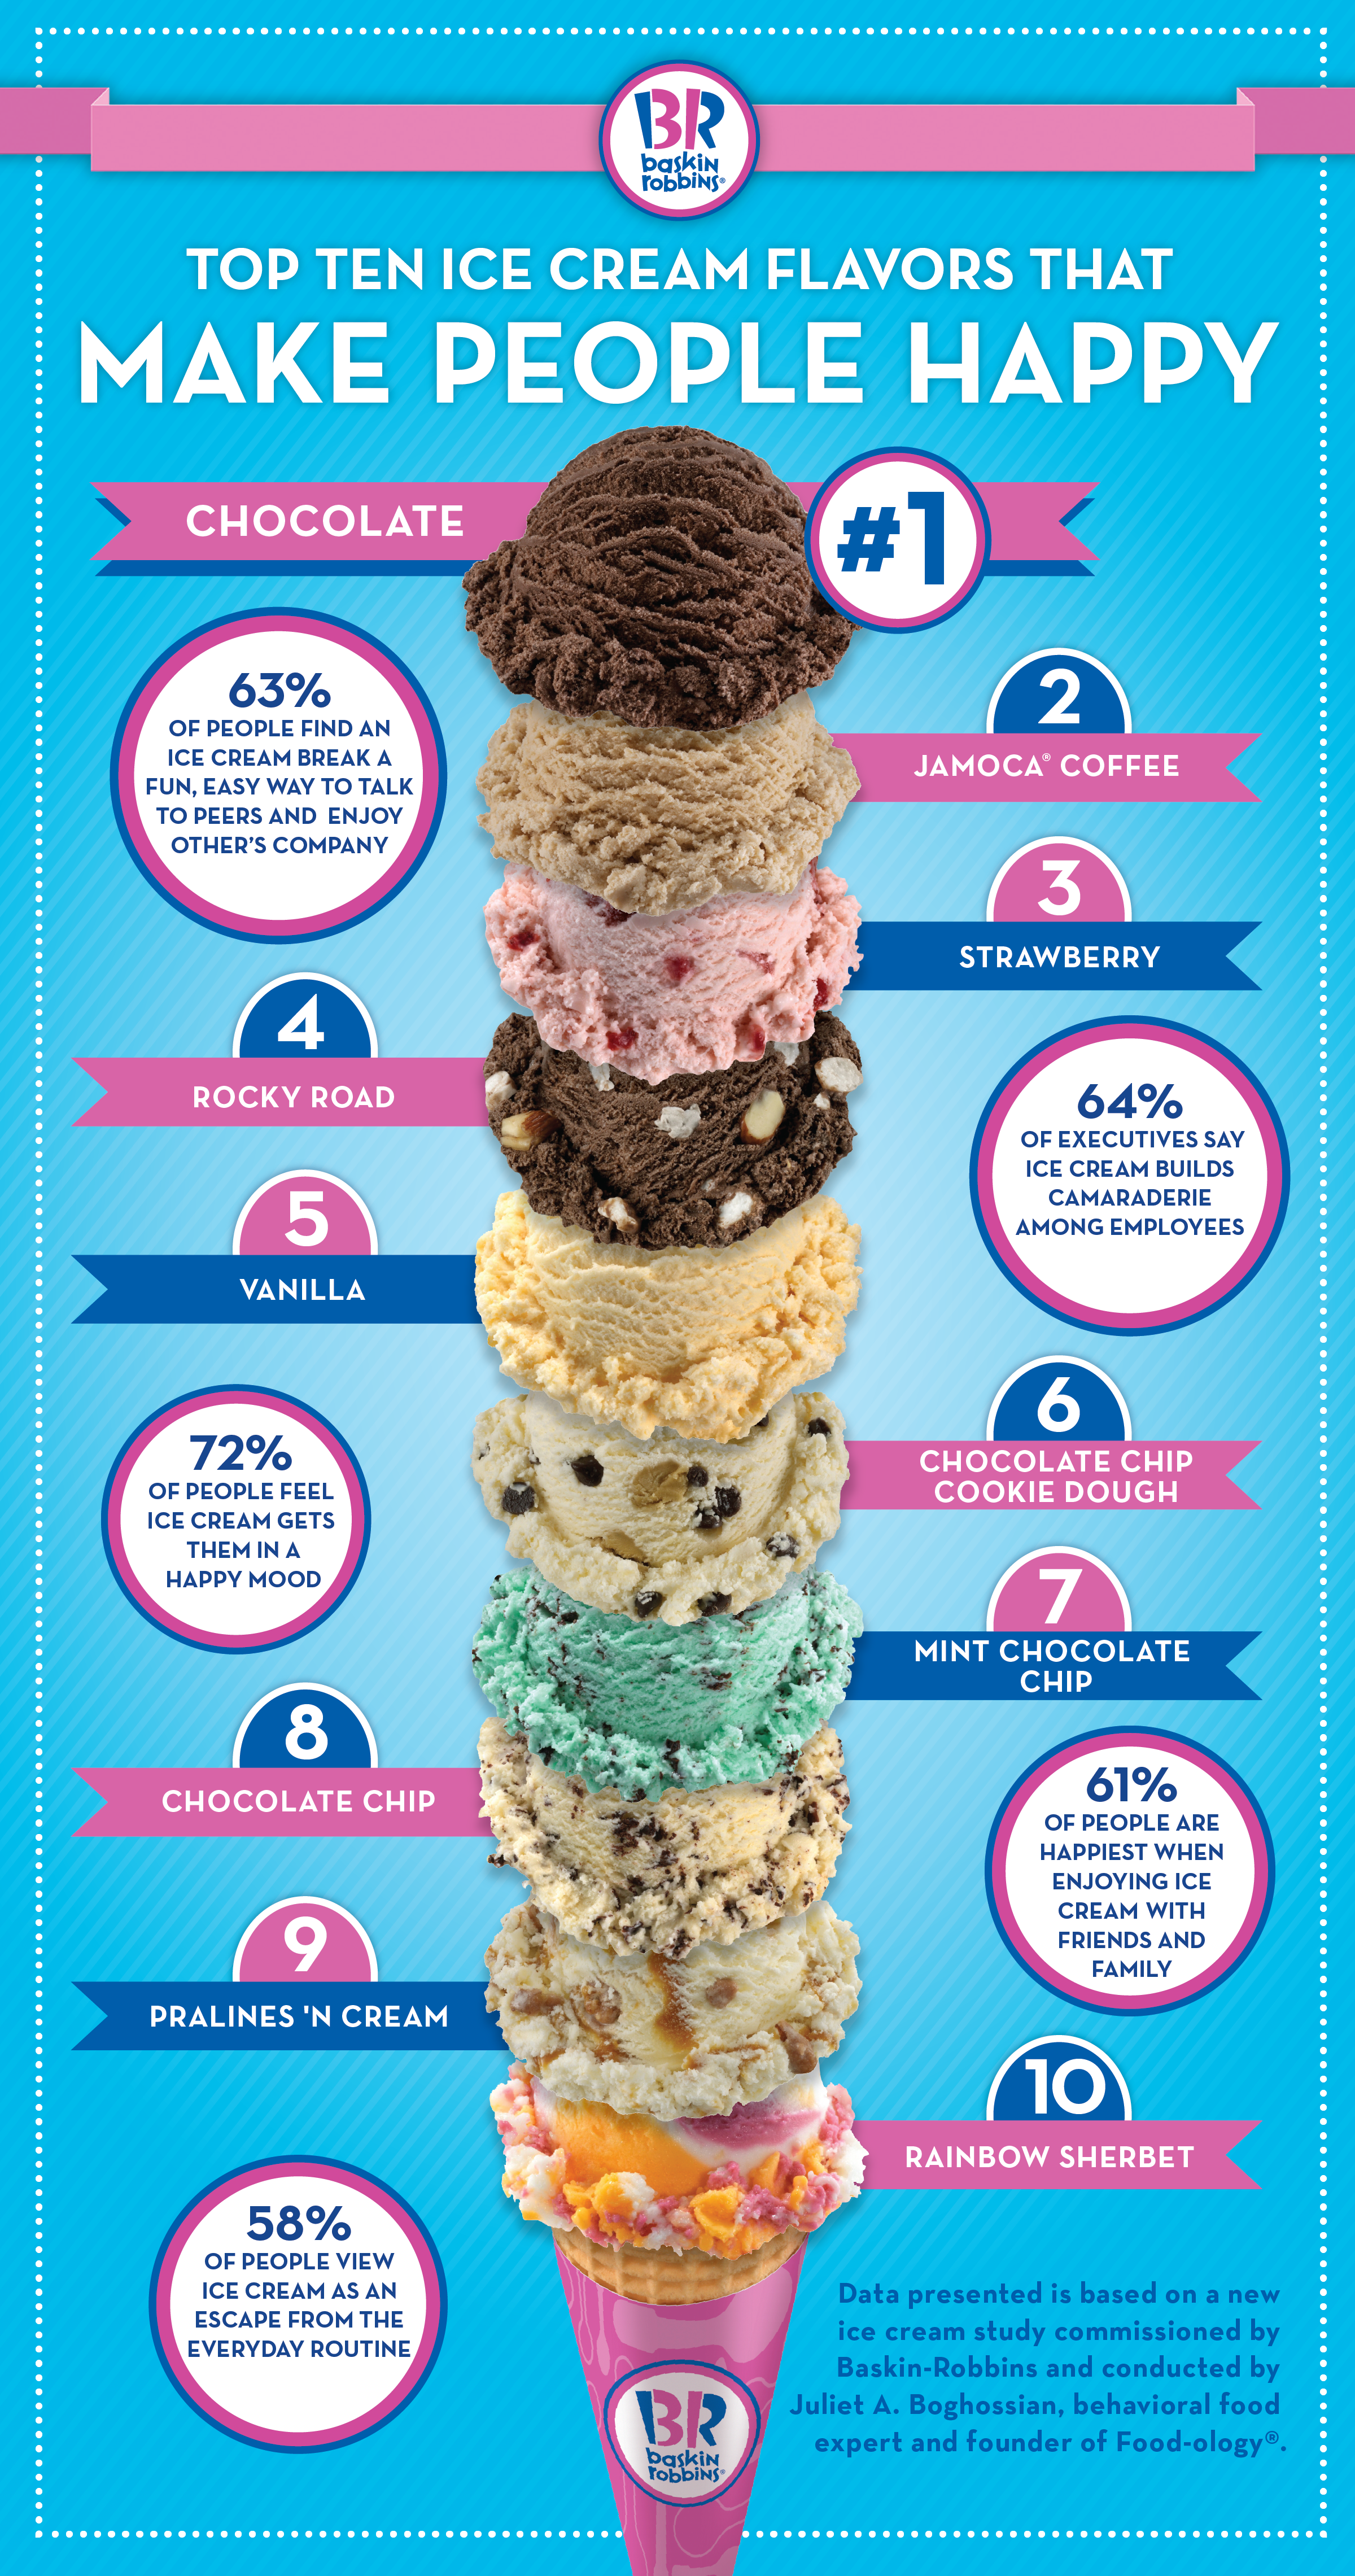 Intens hvid Jeg spiser morgenmad Baskin-Robbins Reveals Top Ten Ice Cream Flavors That Make People the  Happiest | Visual.ly